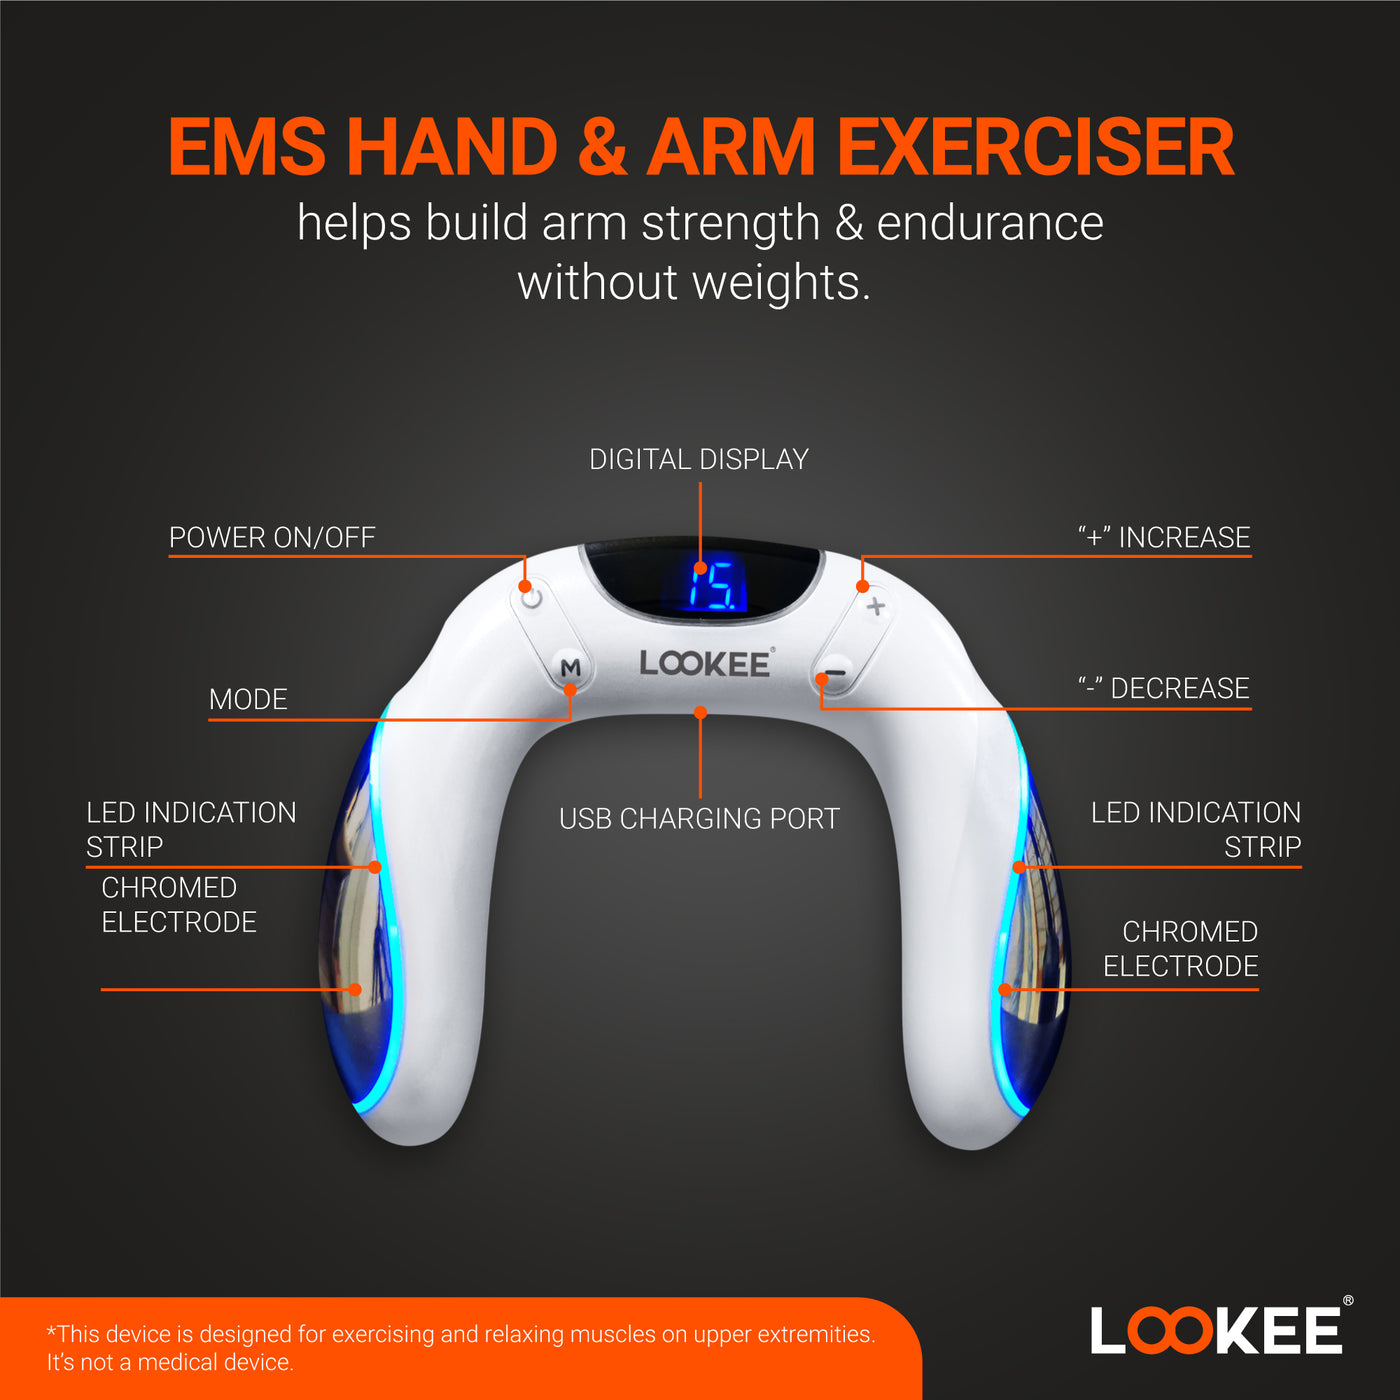 LOOKEE® A8 Arm Workout EMS Exerciser, Electric Muscle Stimulator Trainer Machine for Arms and Hands.